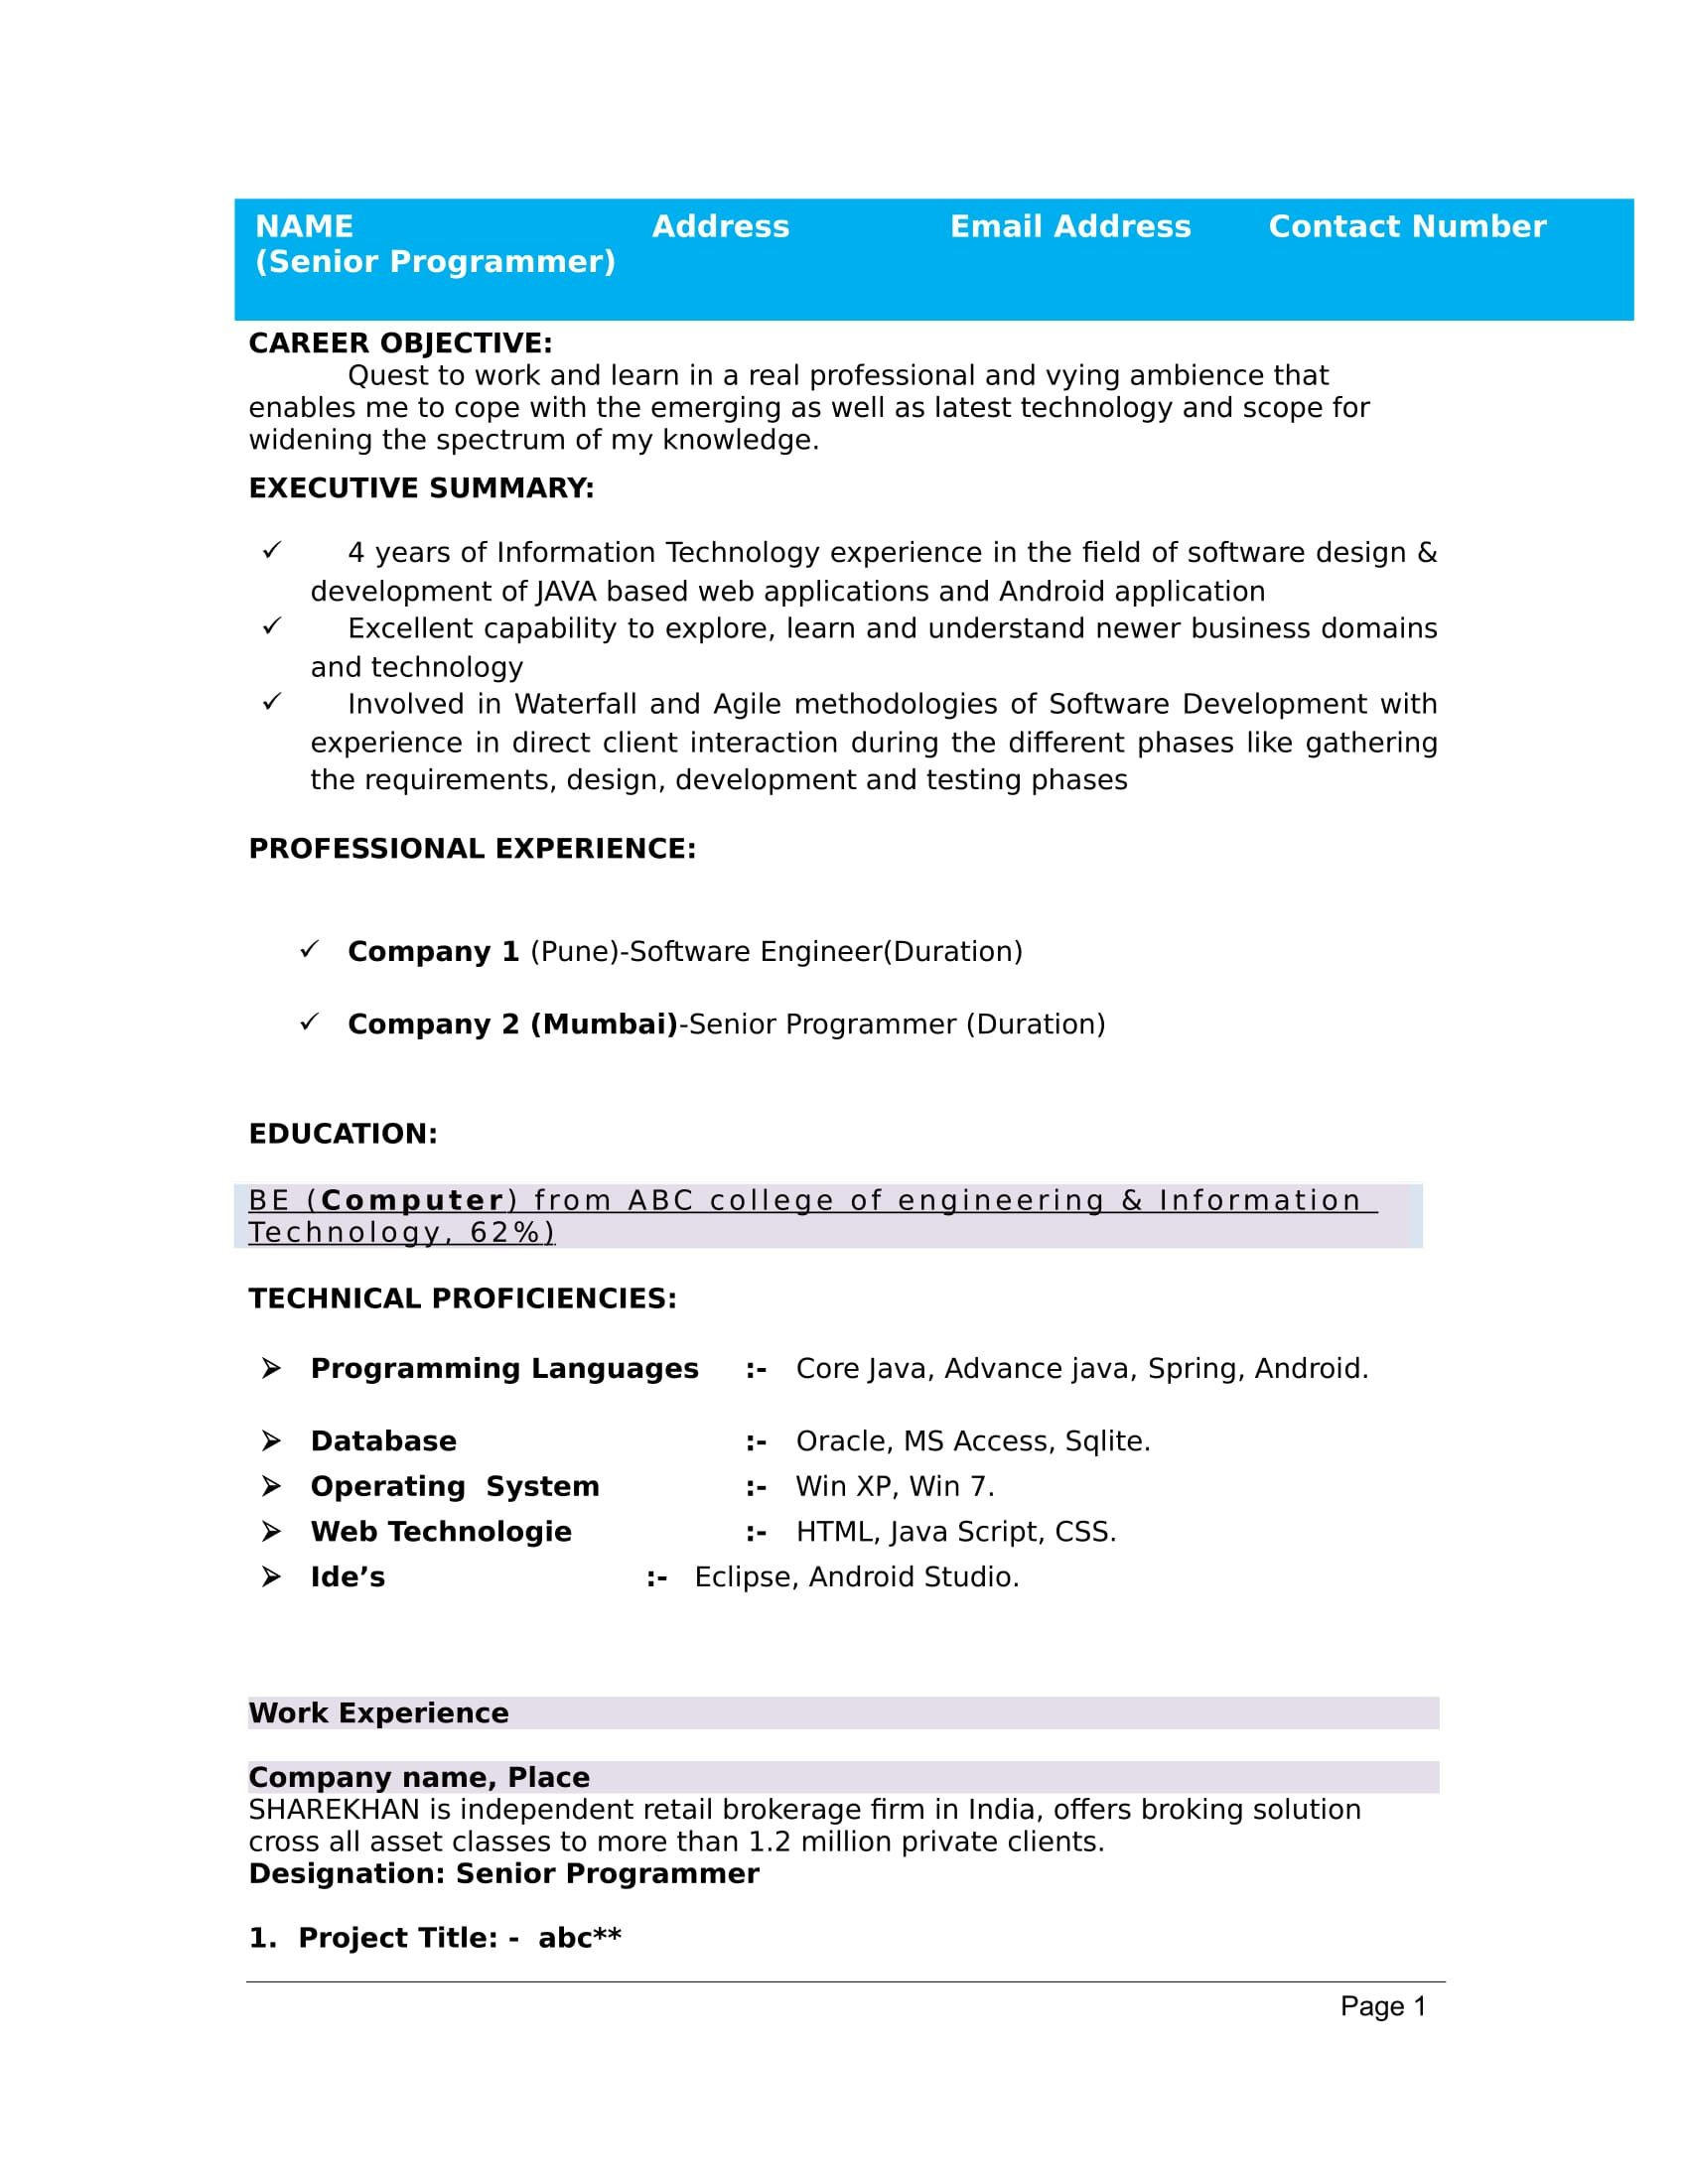 About Me In Resume Sample for Freshers 32 Resume Templates for Freshers Download Free Word